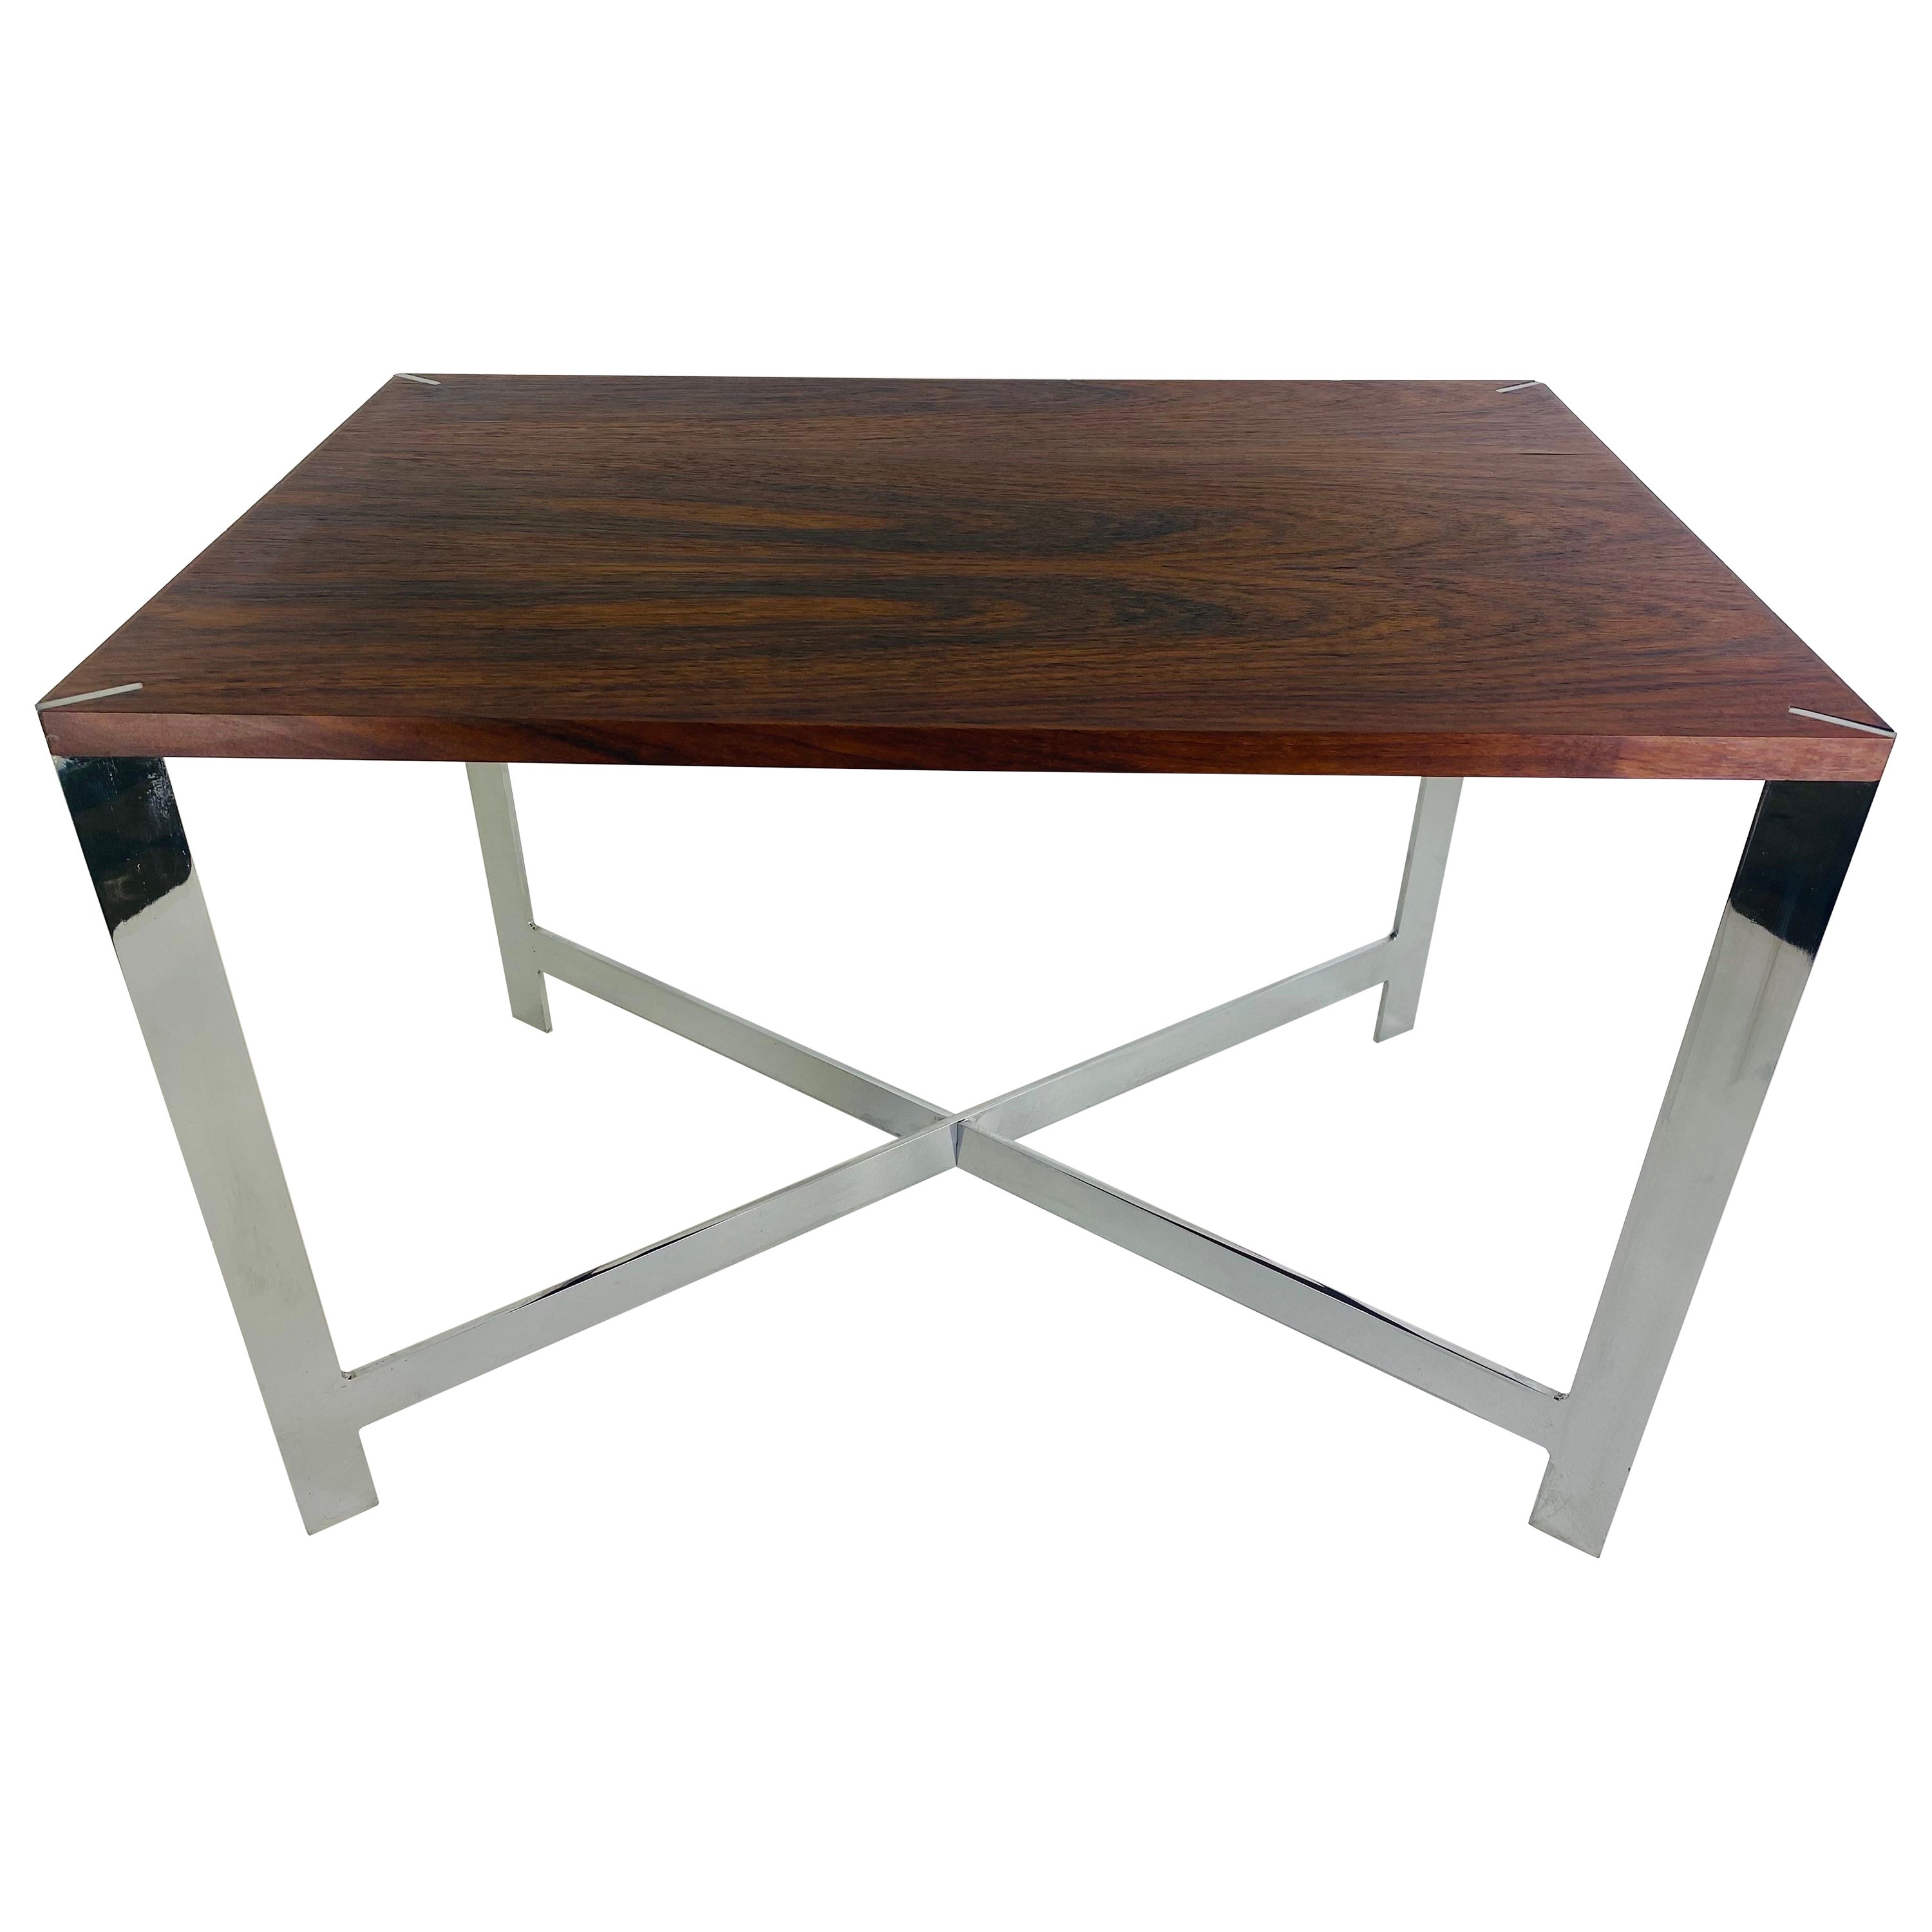 Milo Baughman for Lane furniture, Rosewood and chrome side table For Sale